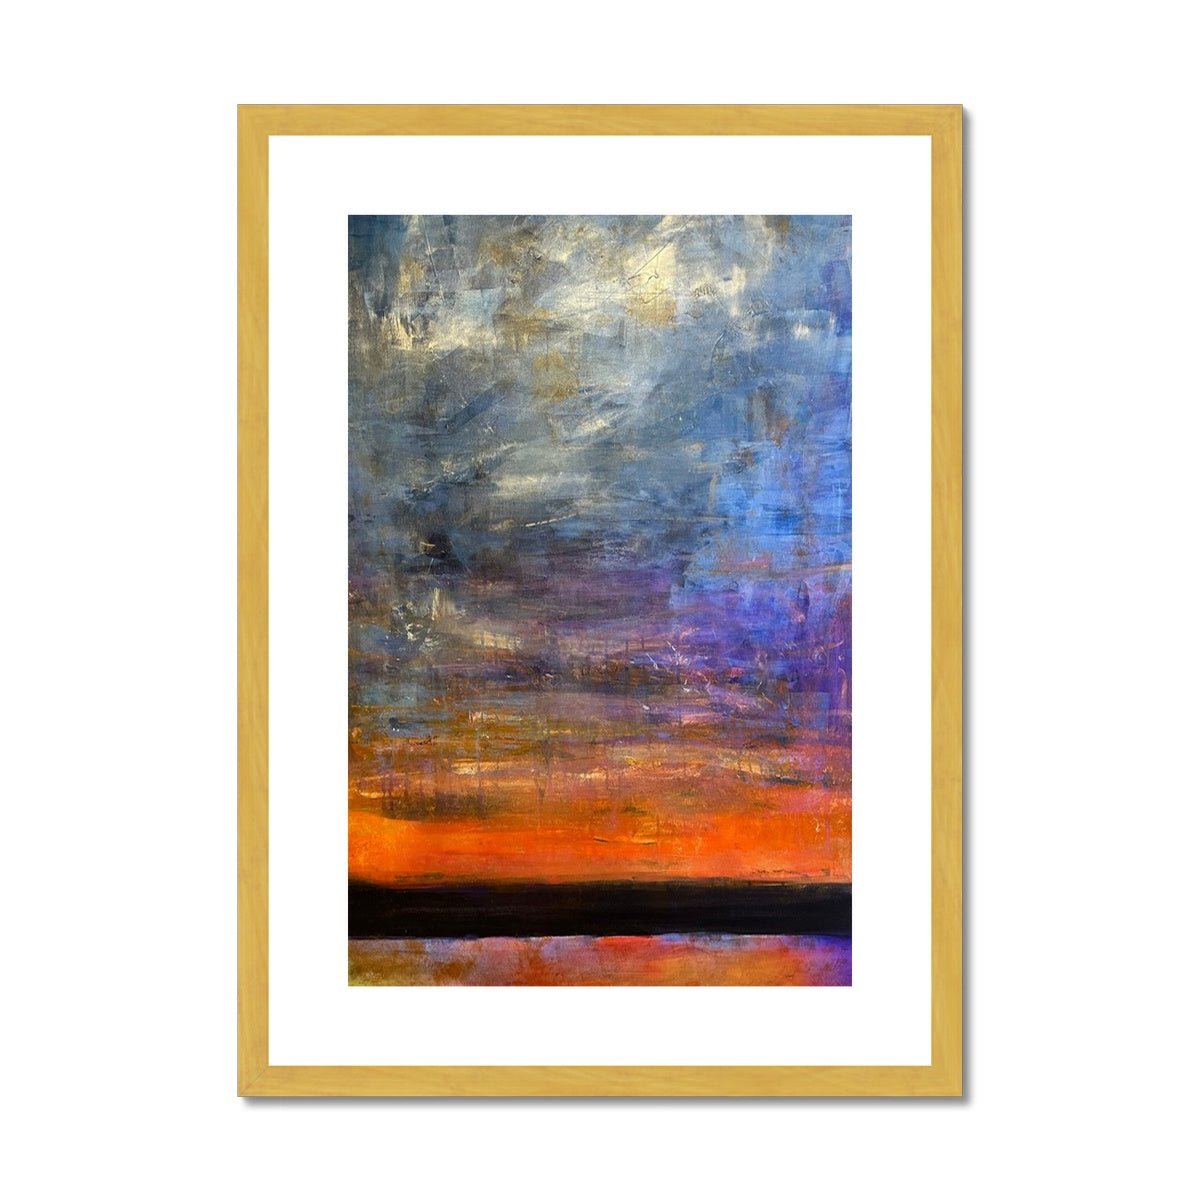 Horizon Dreams Abstract Painting | Antique Framed & Mounted Prints From Scotland-Antique Framed & Mounted Prints-Abstract & Impressionistic Art Gallery-A2 Portrait-Gold Frame-Paintings, Prints, Homeware, Art Gifts From Scotland By Scottish Artist Kevin Hunter